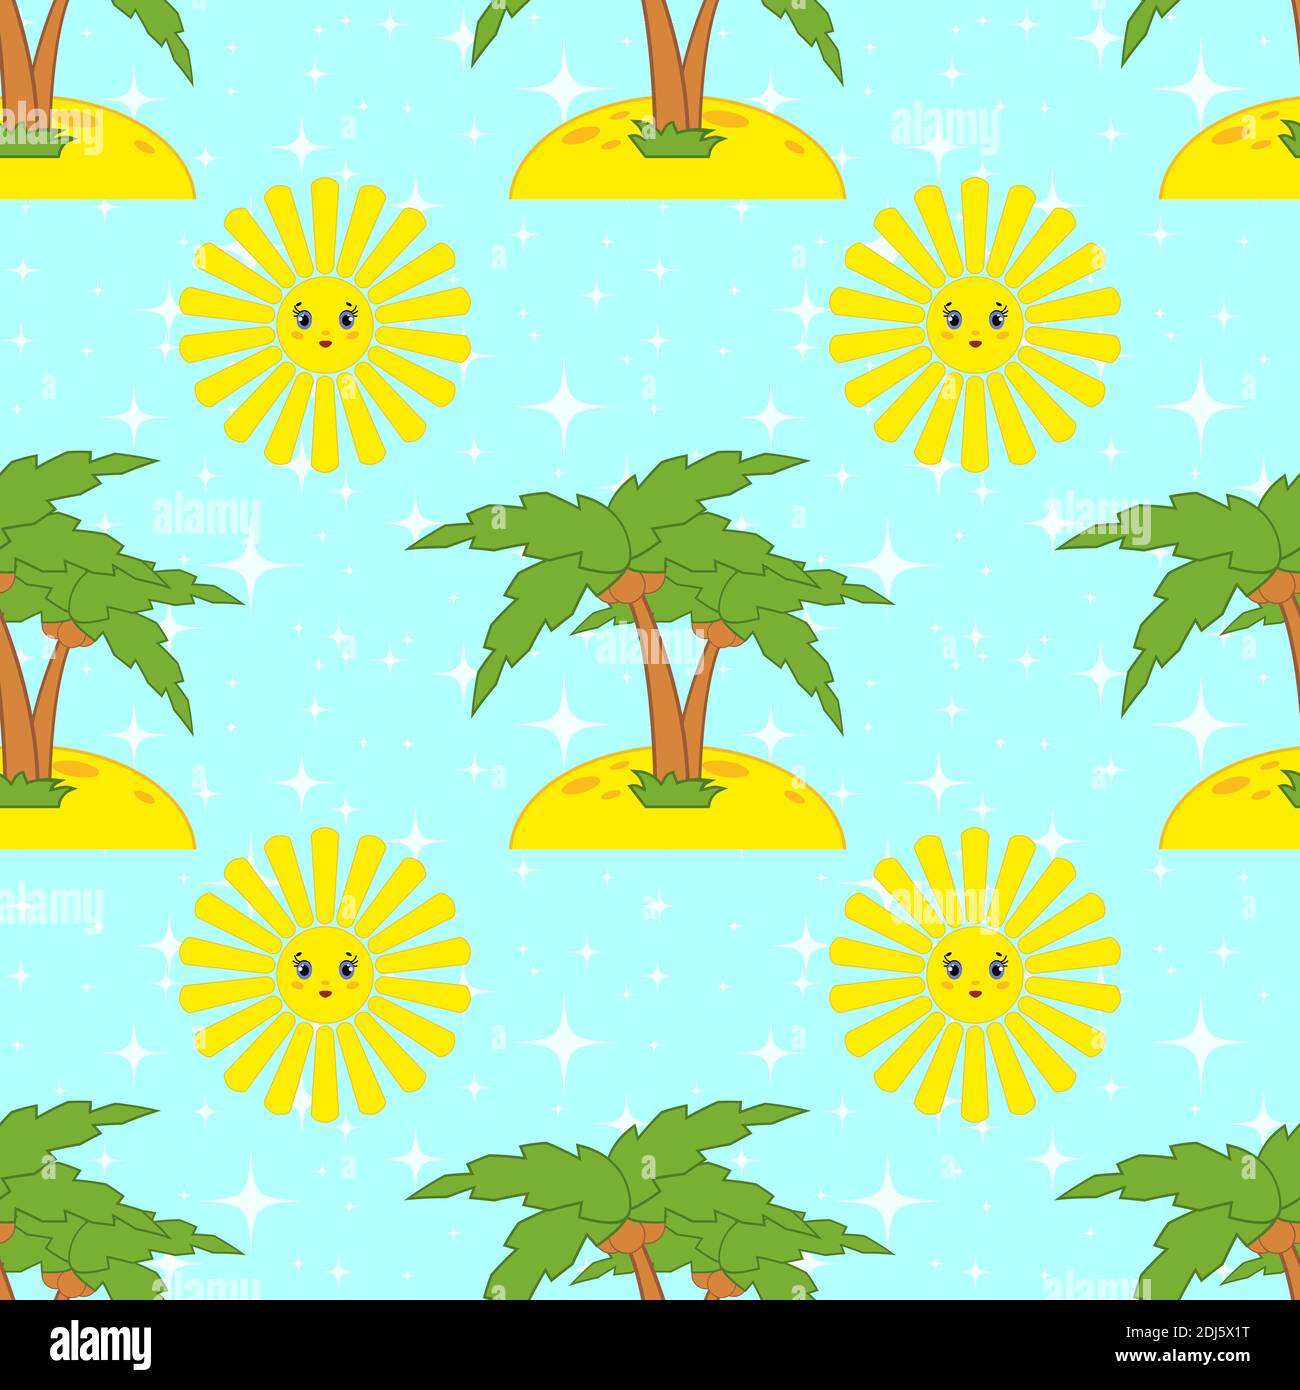 Colorful seamless pattern of sun and palm trees on a blue background. Simple flat vector illustration. For the design of paper wallpapers, fabric, wra Stock Vector